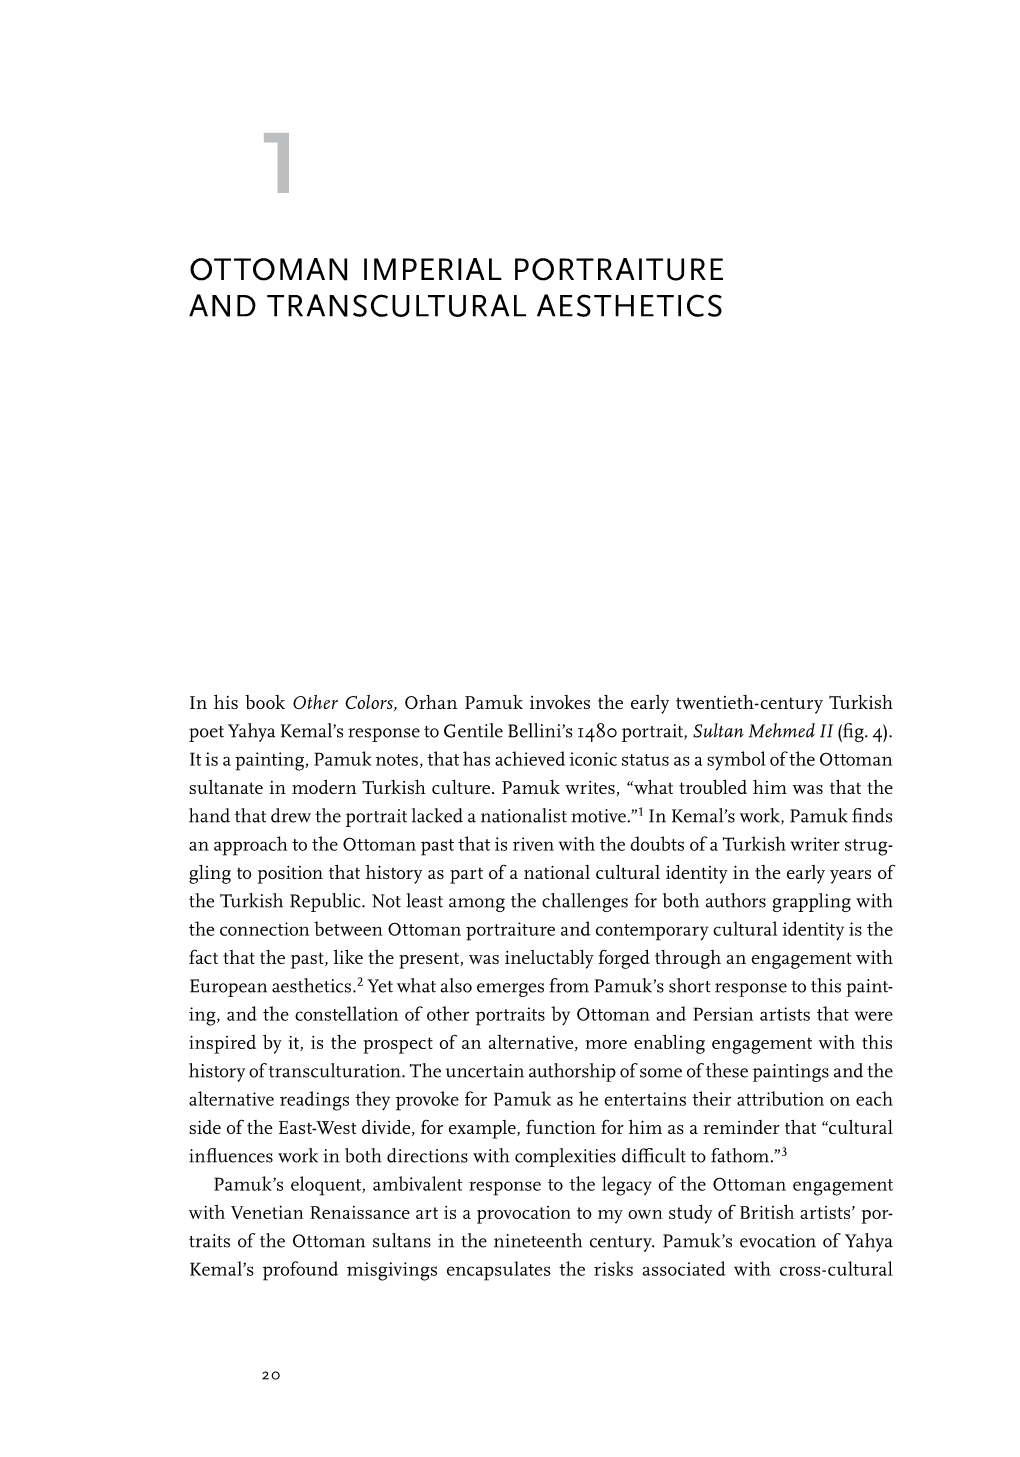 Ottoman Imperial Portraiture and Transcultural Aesthetics